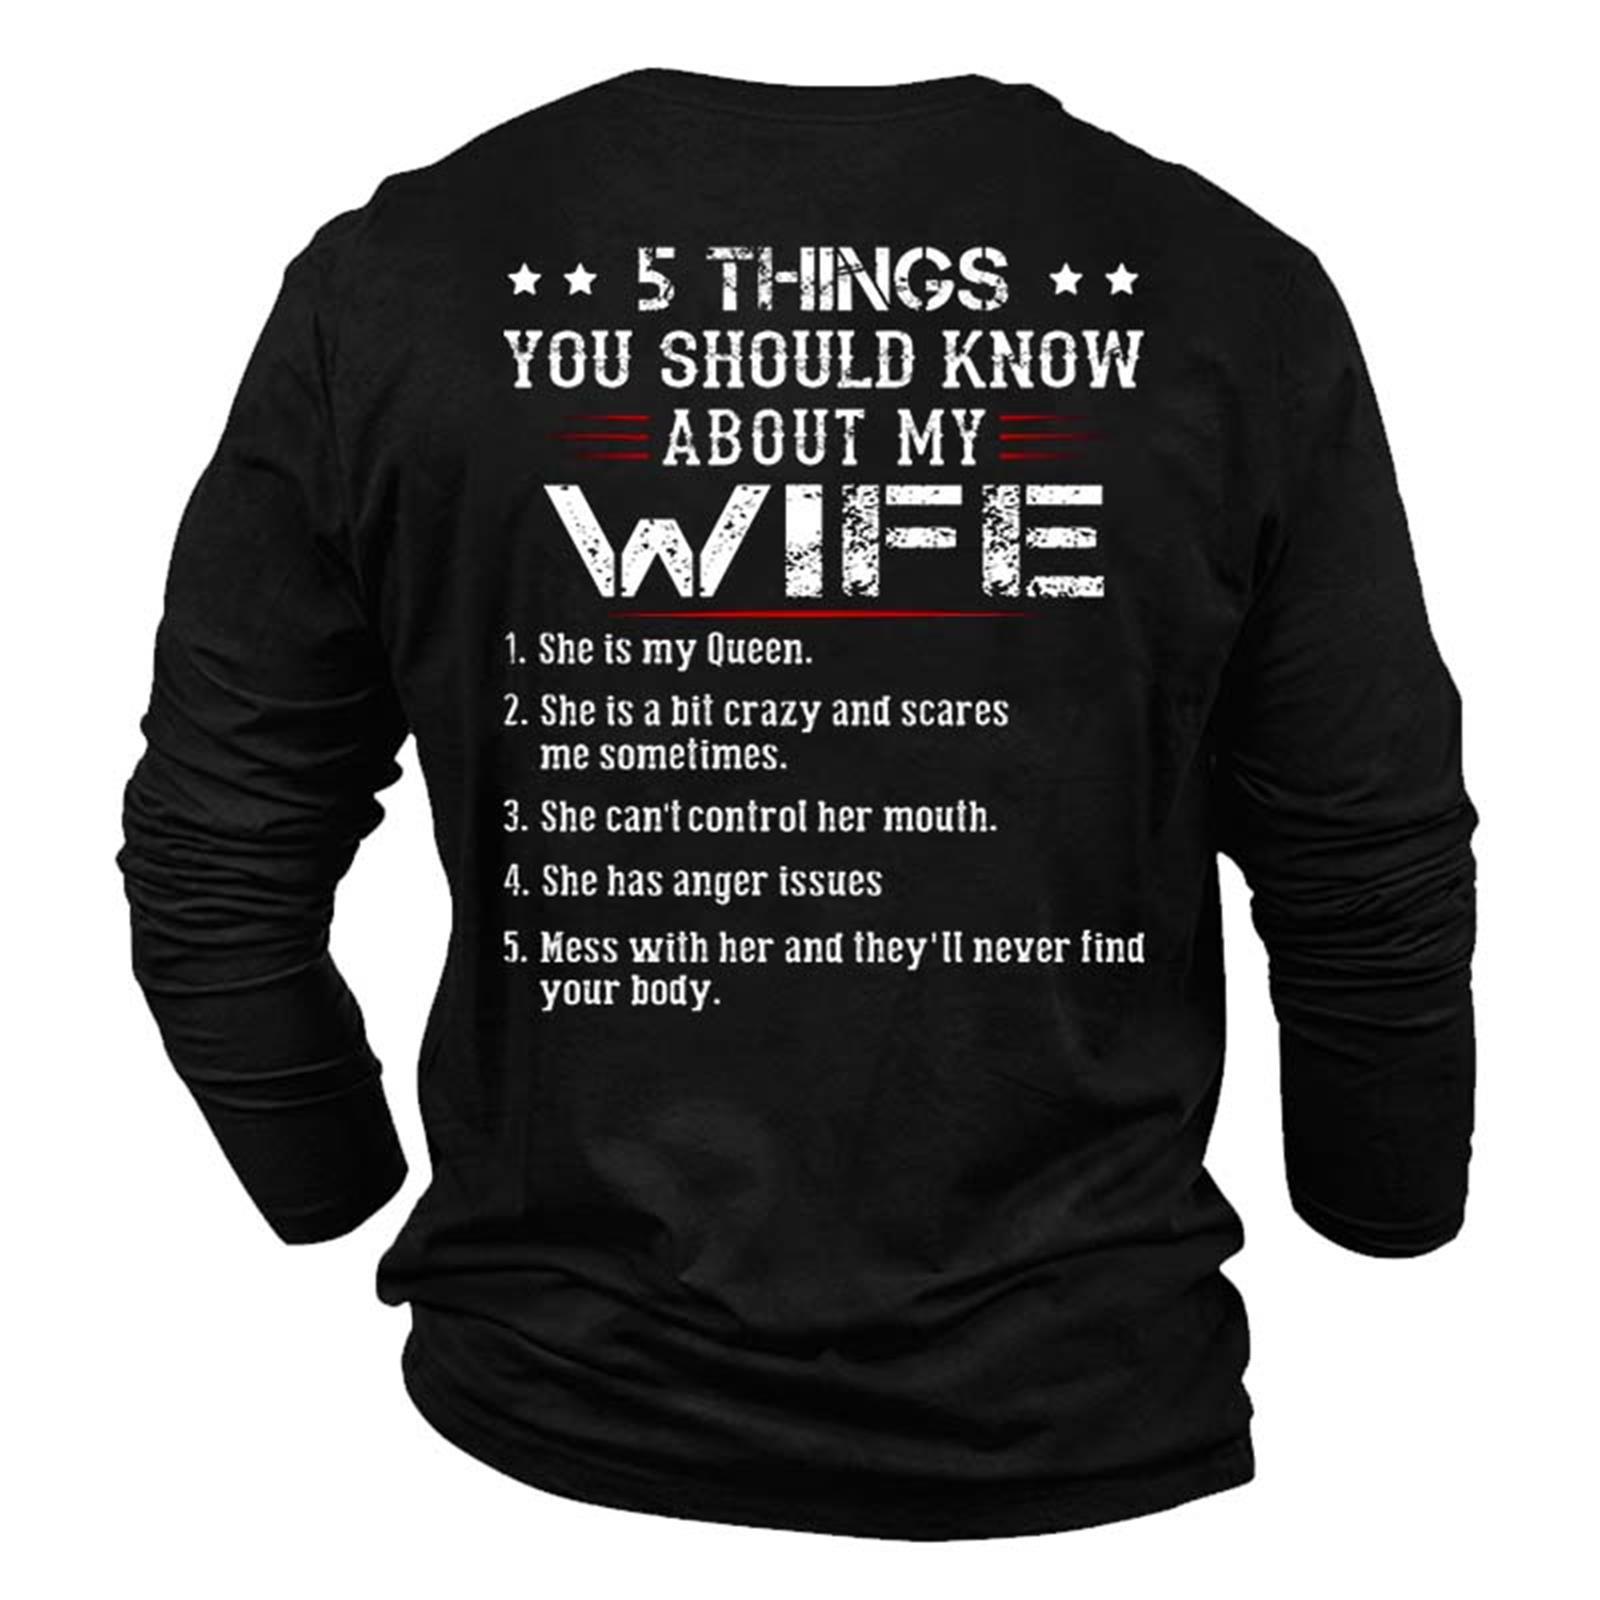 Men's 5 Things Know Chic About My Wife Cotton Long Sleeve T-shirt